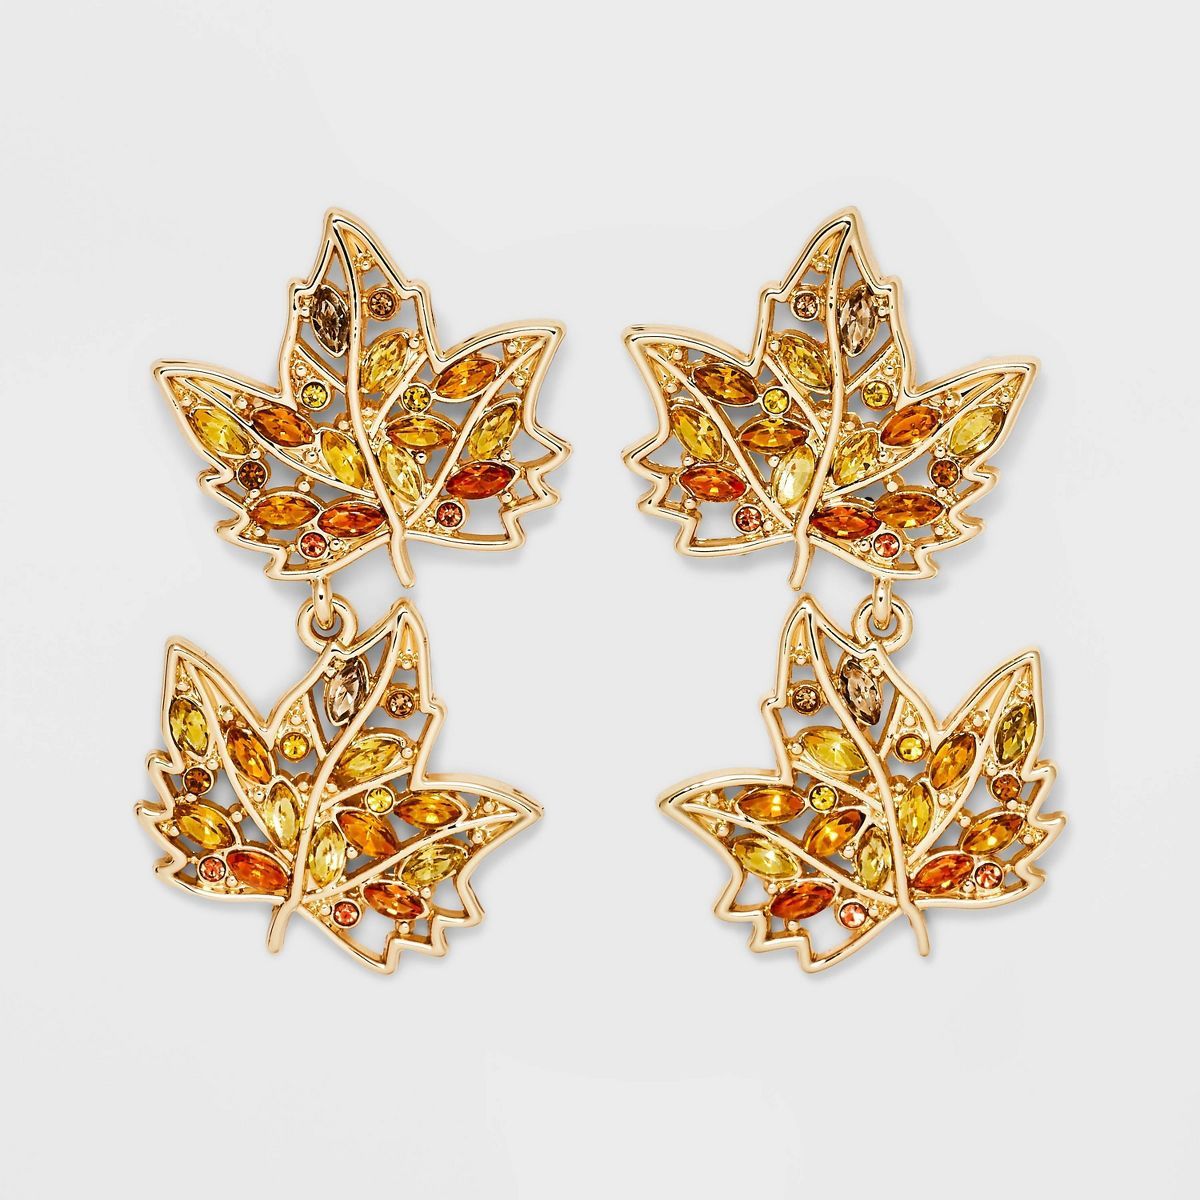 SUGARFIX by BaubleBar "Leaf It To Me" Statement Earrings - Yellow | Target